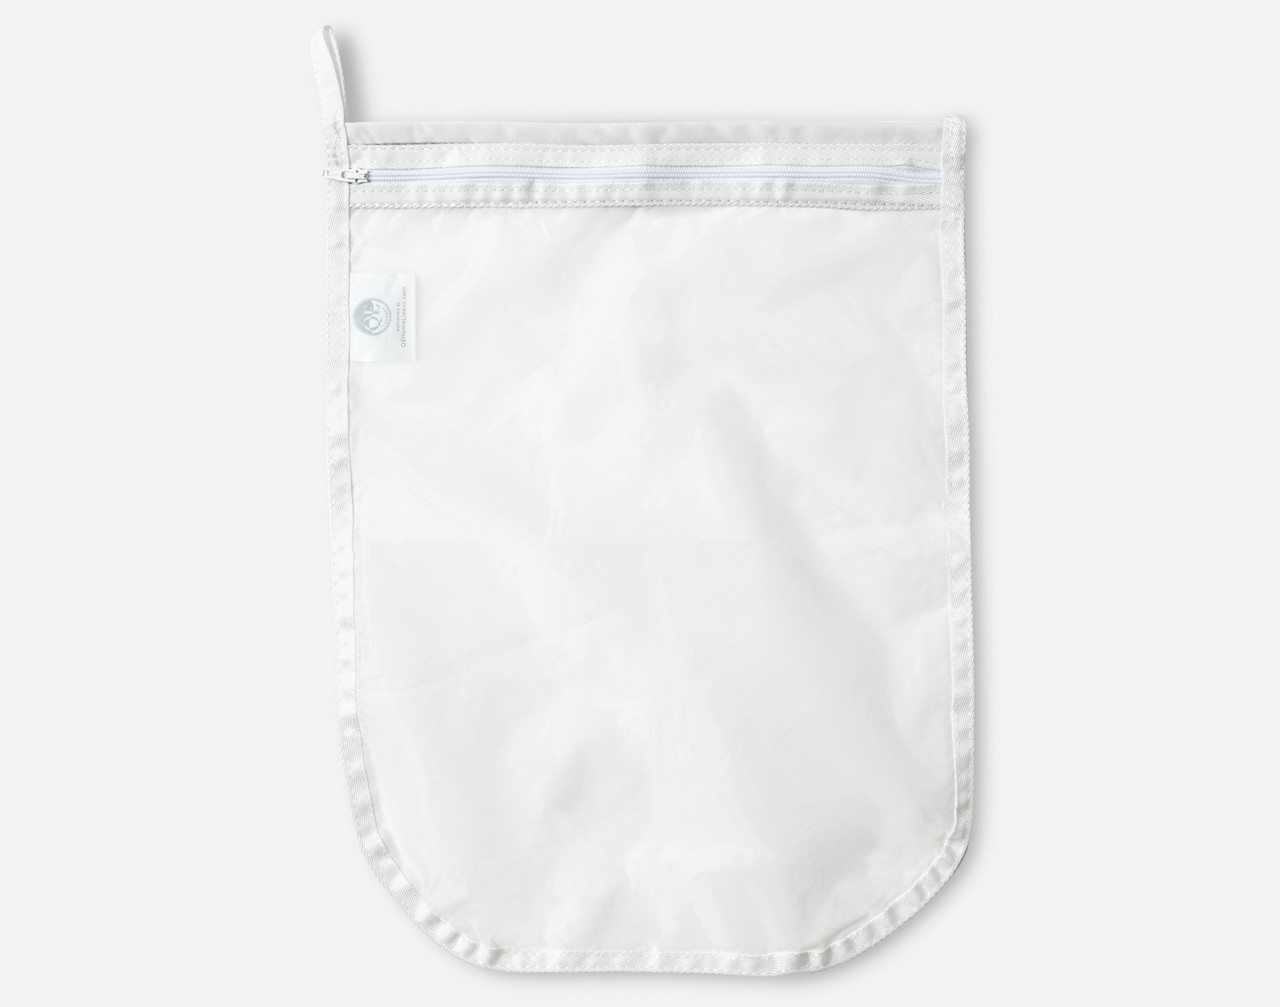 Our Mighty Mesh Laundry Bag in Medium sitting against a solid white background.